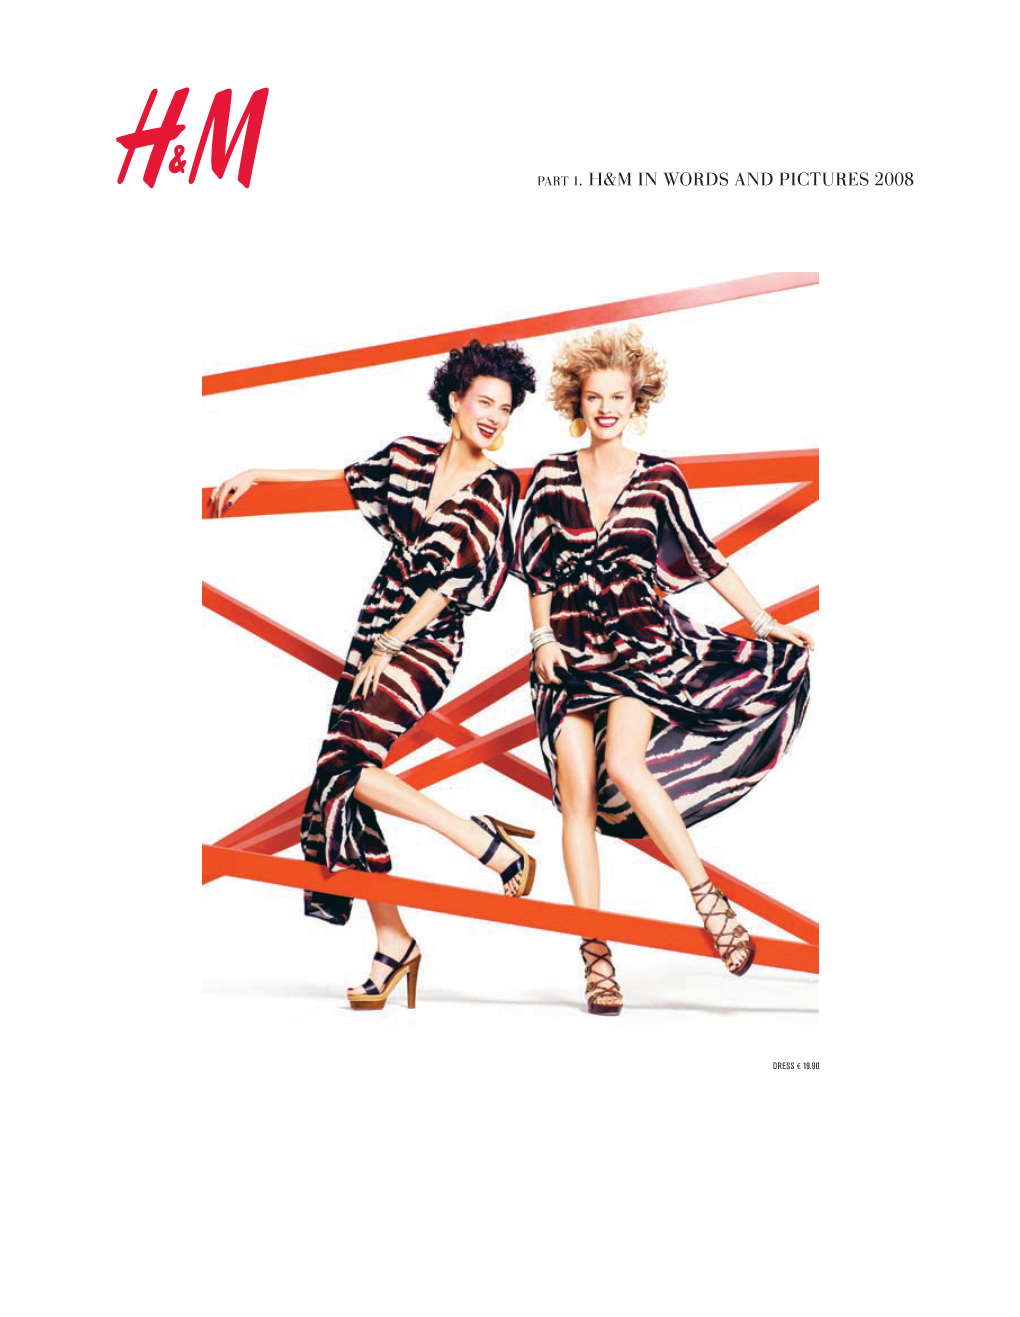 Annual Report 2008 Is Divided Into Two Parts; H&M in Words and Pictures 2008 and H&M in Figures 2008 Including the Annual Accounts and Consolidated Accounts